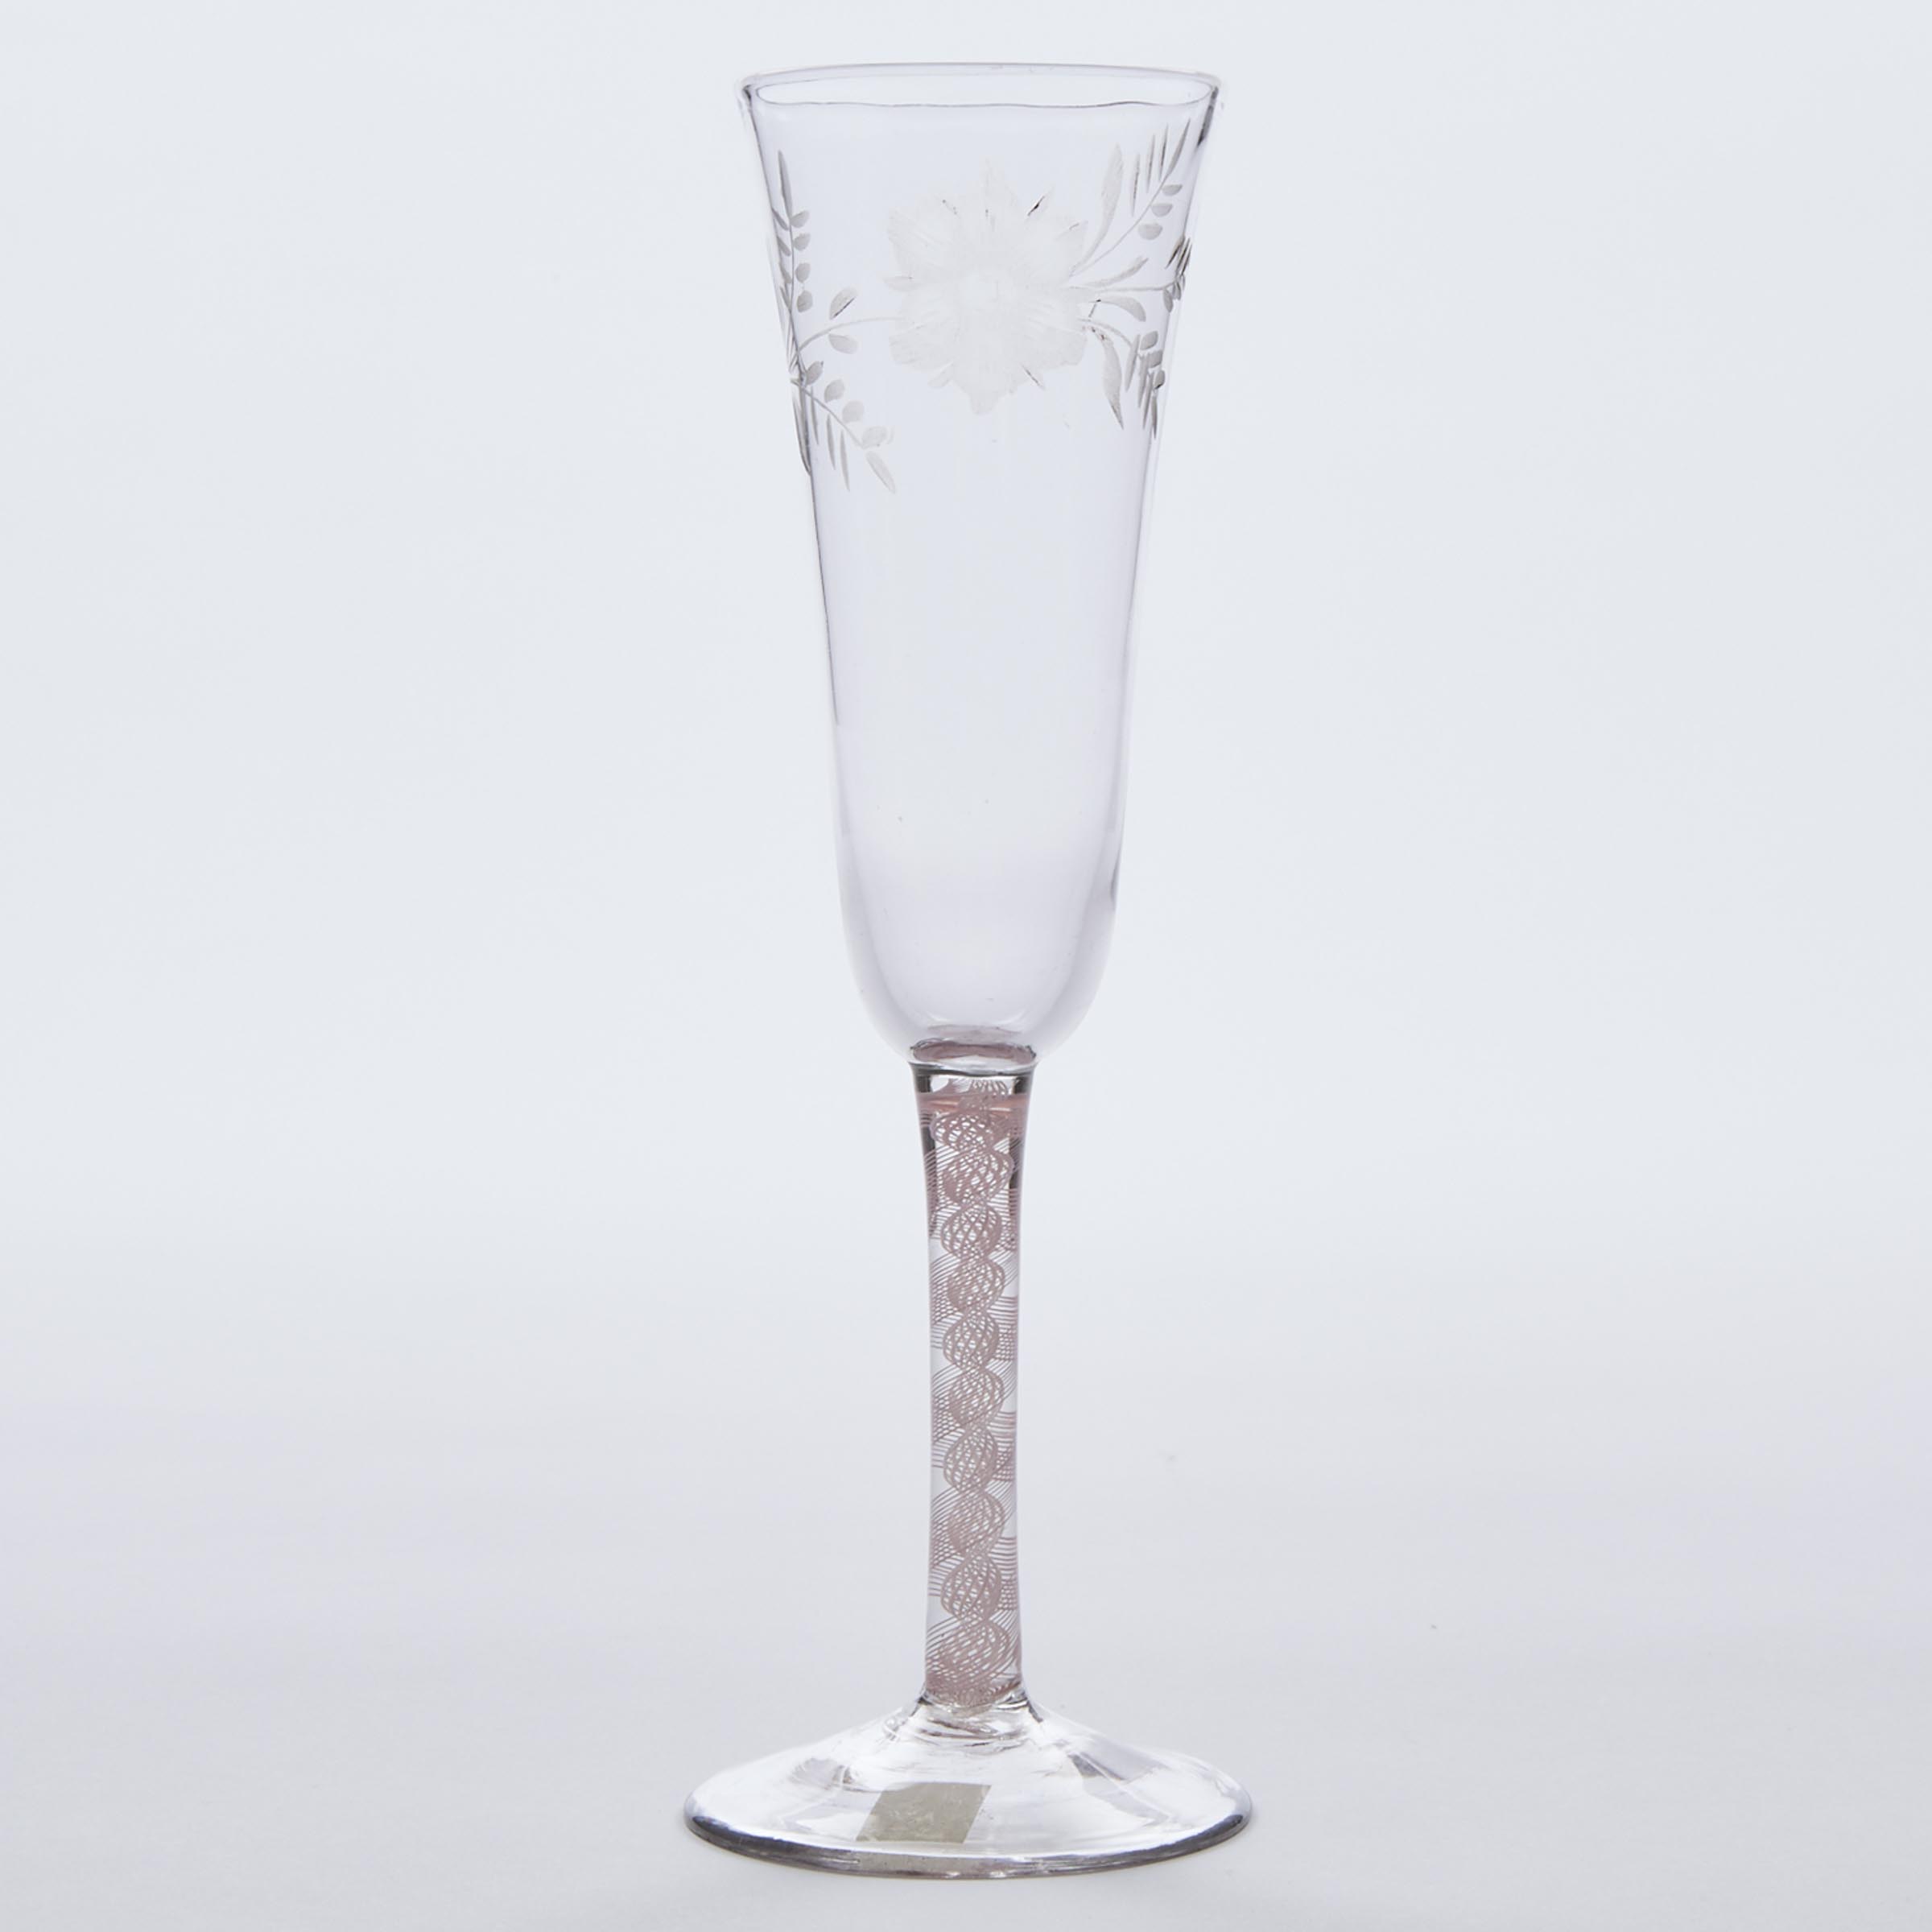 English Opaque Twist Stemmed Engraved Ale Glass, late 18th century